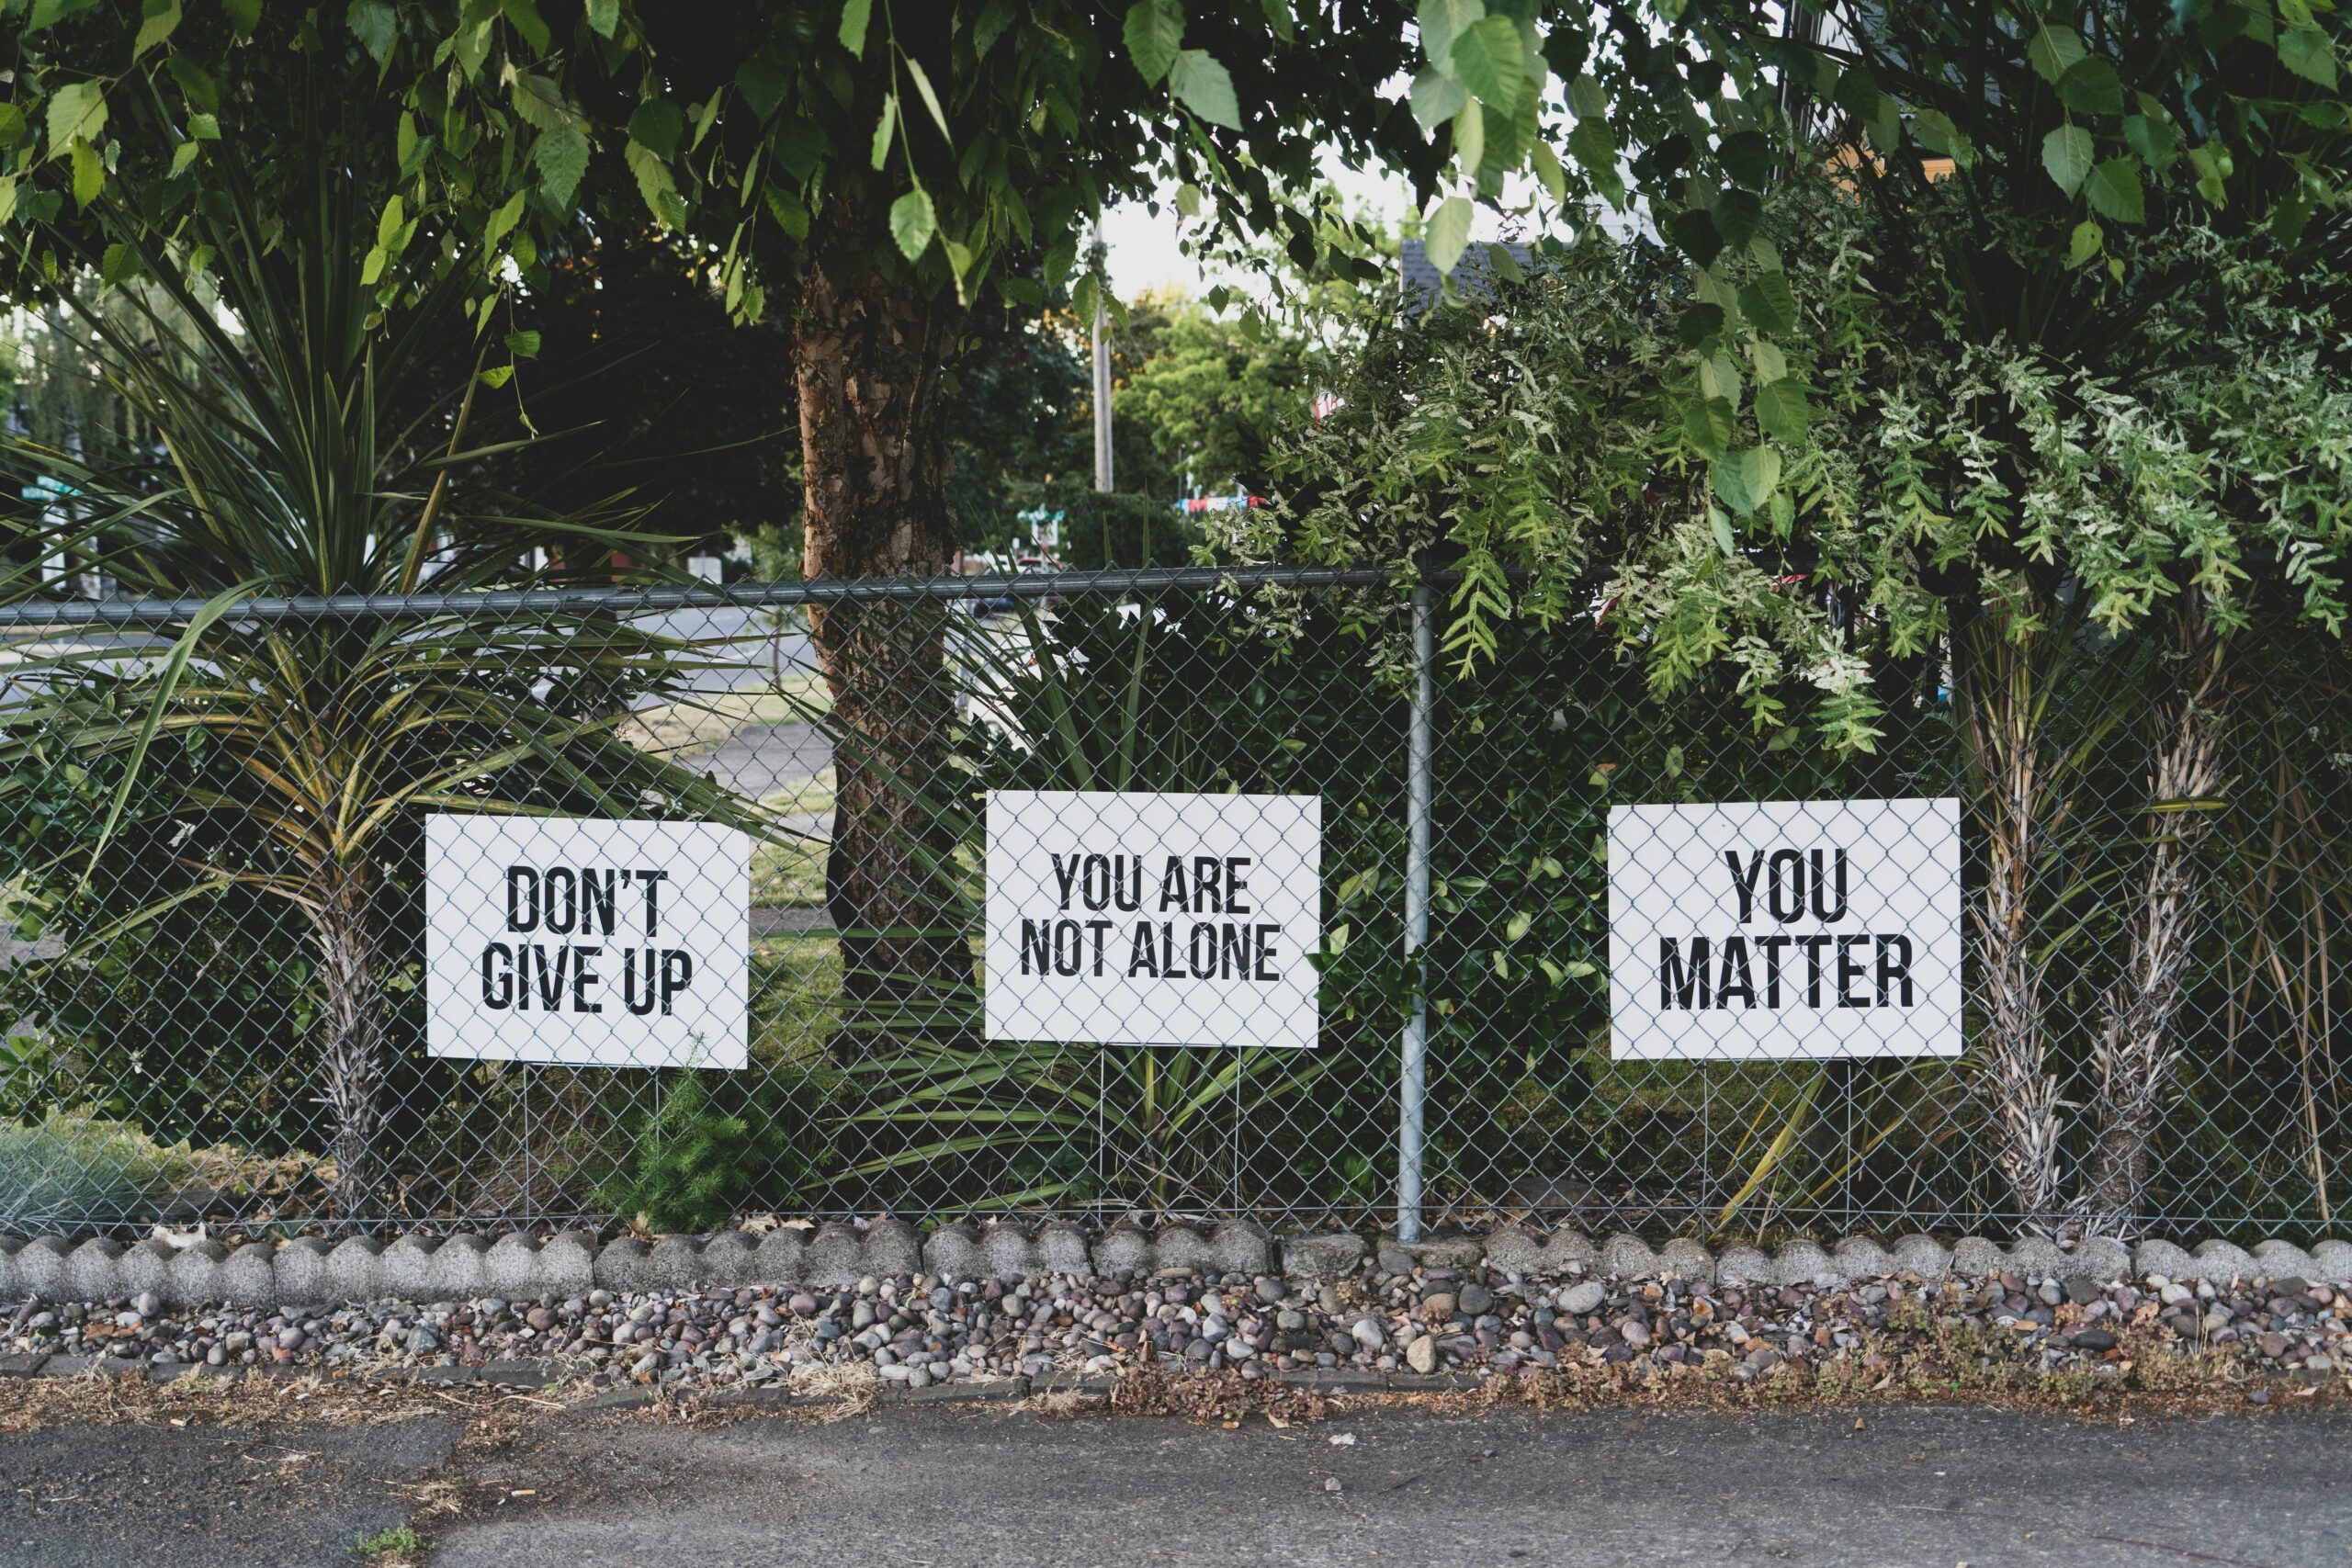 Fence with signs that say positive messages, representing mental health services for the masses through community outreach